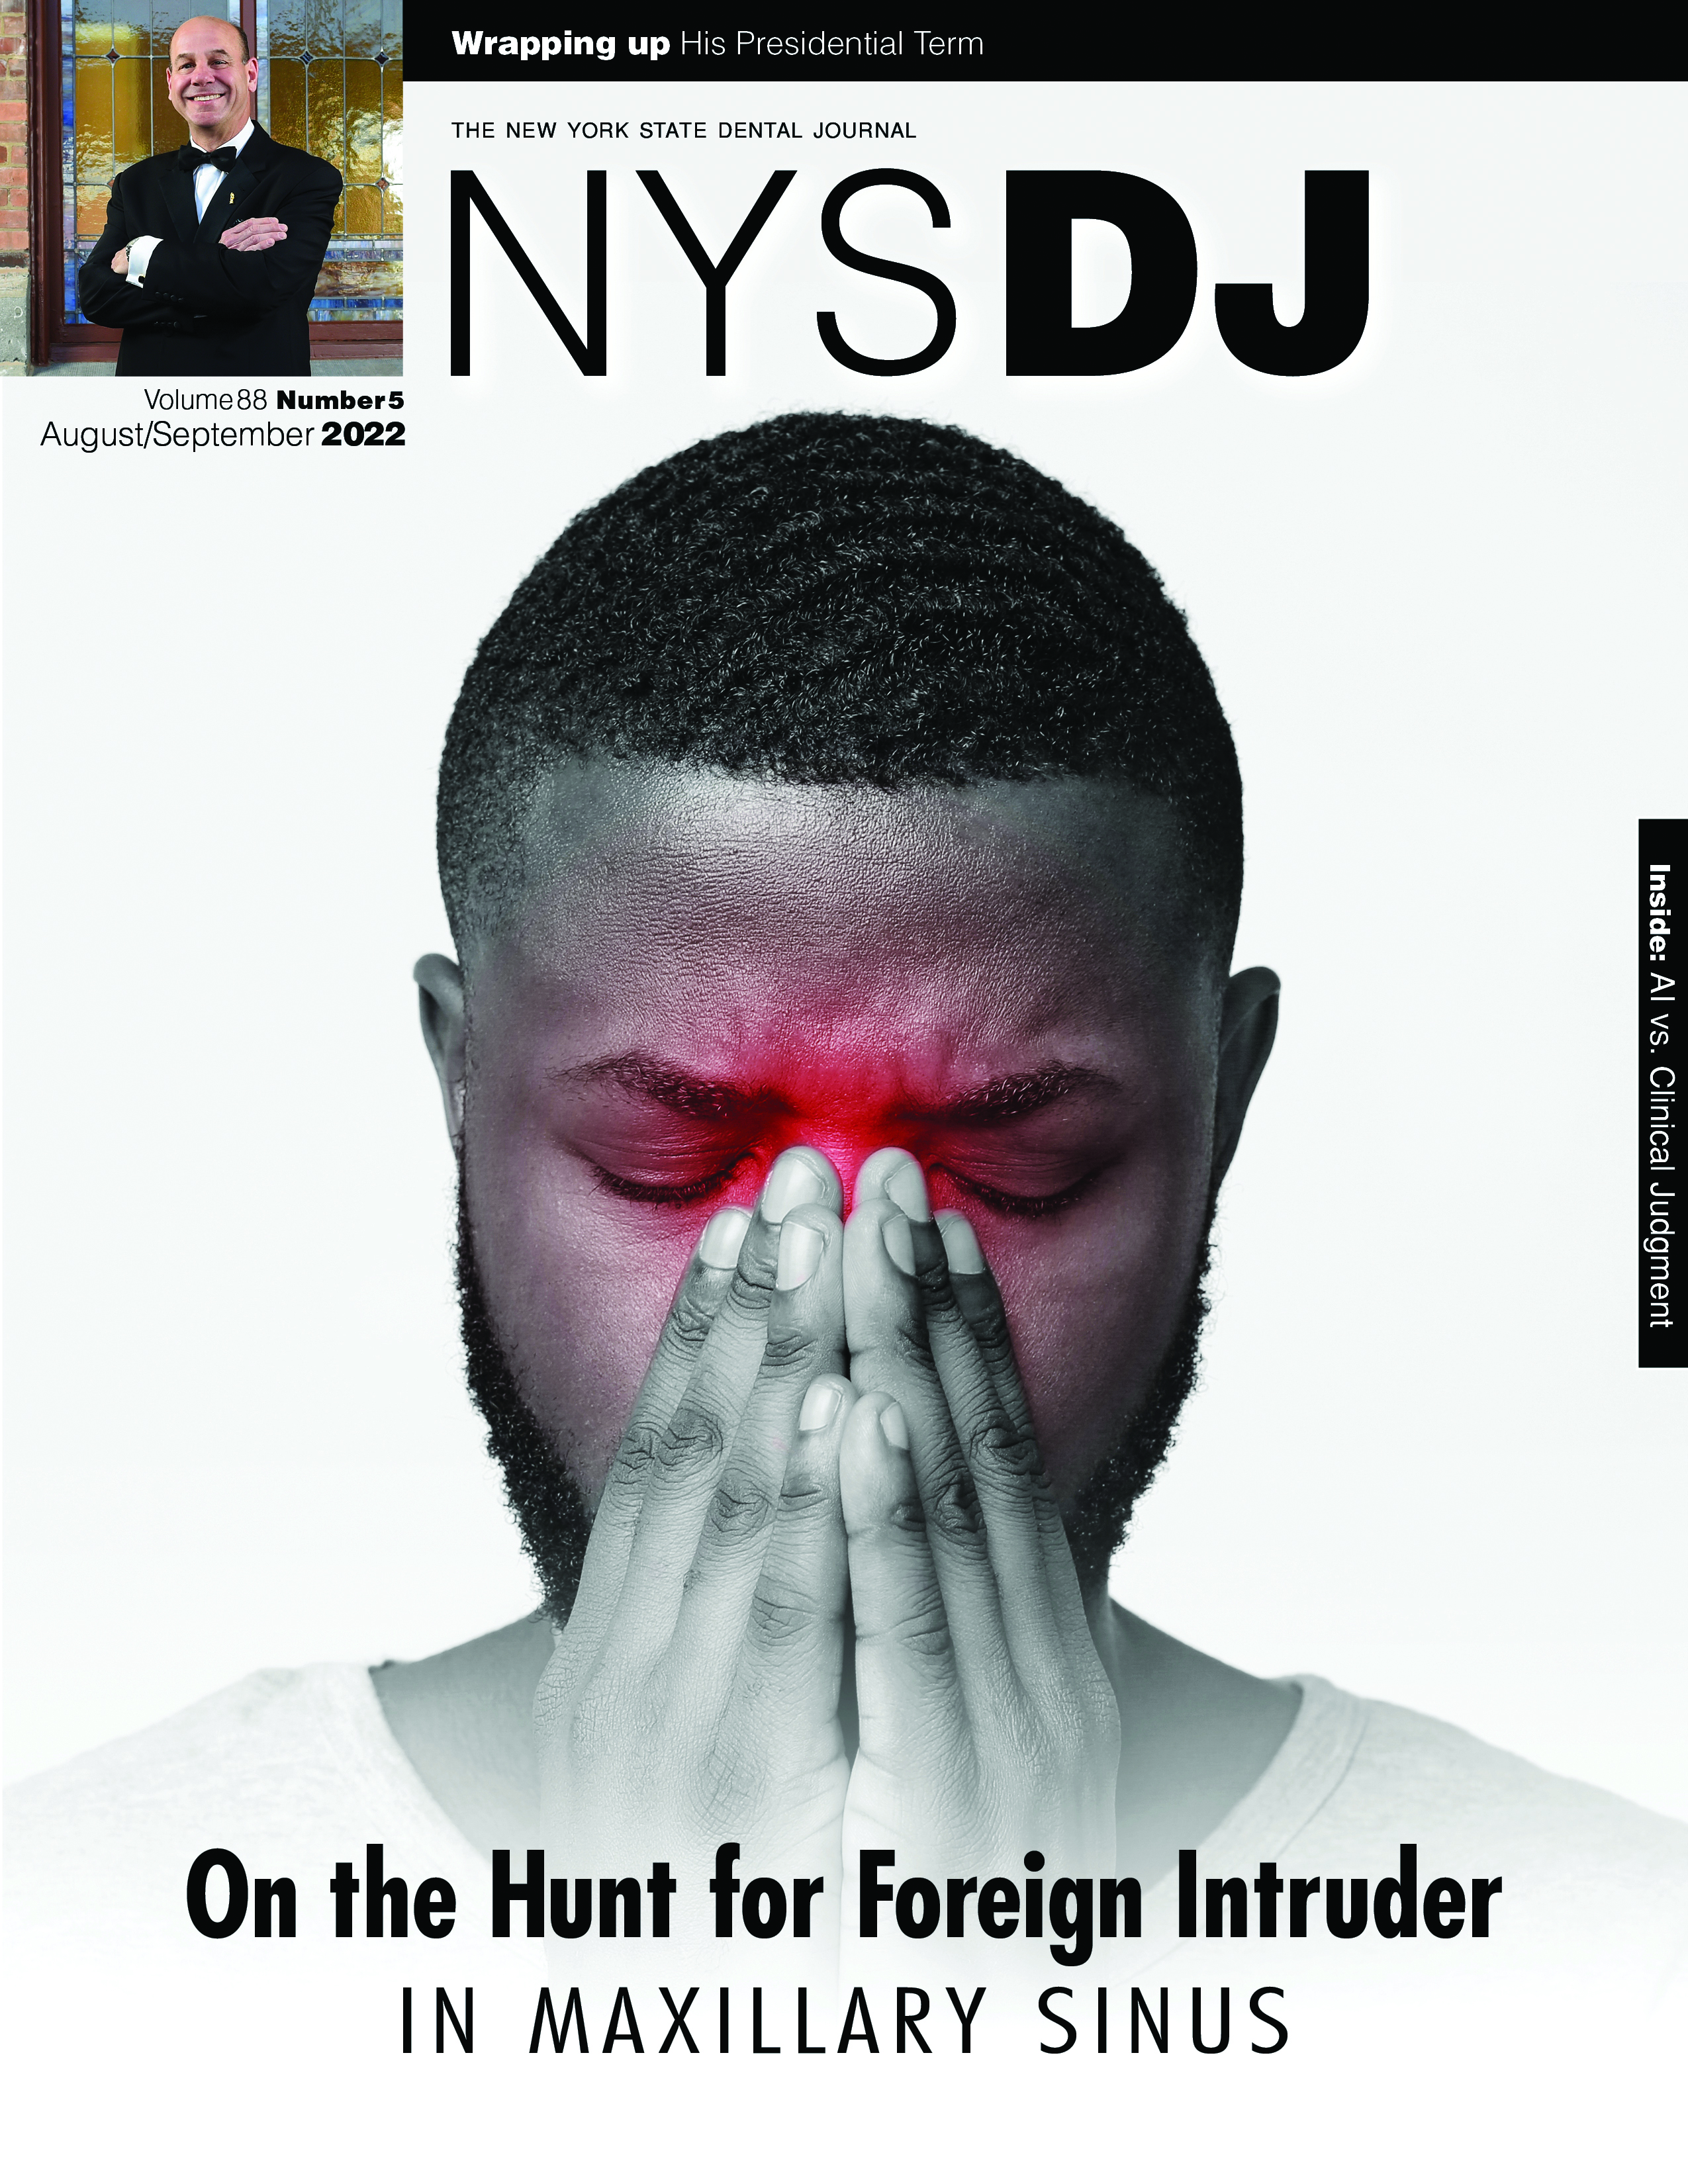 Cover of the NYSDJ with a person holding their nose, the nose is glowing red around their hands.